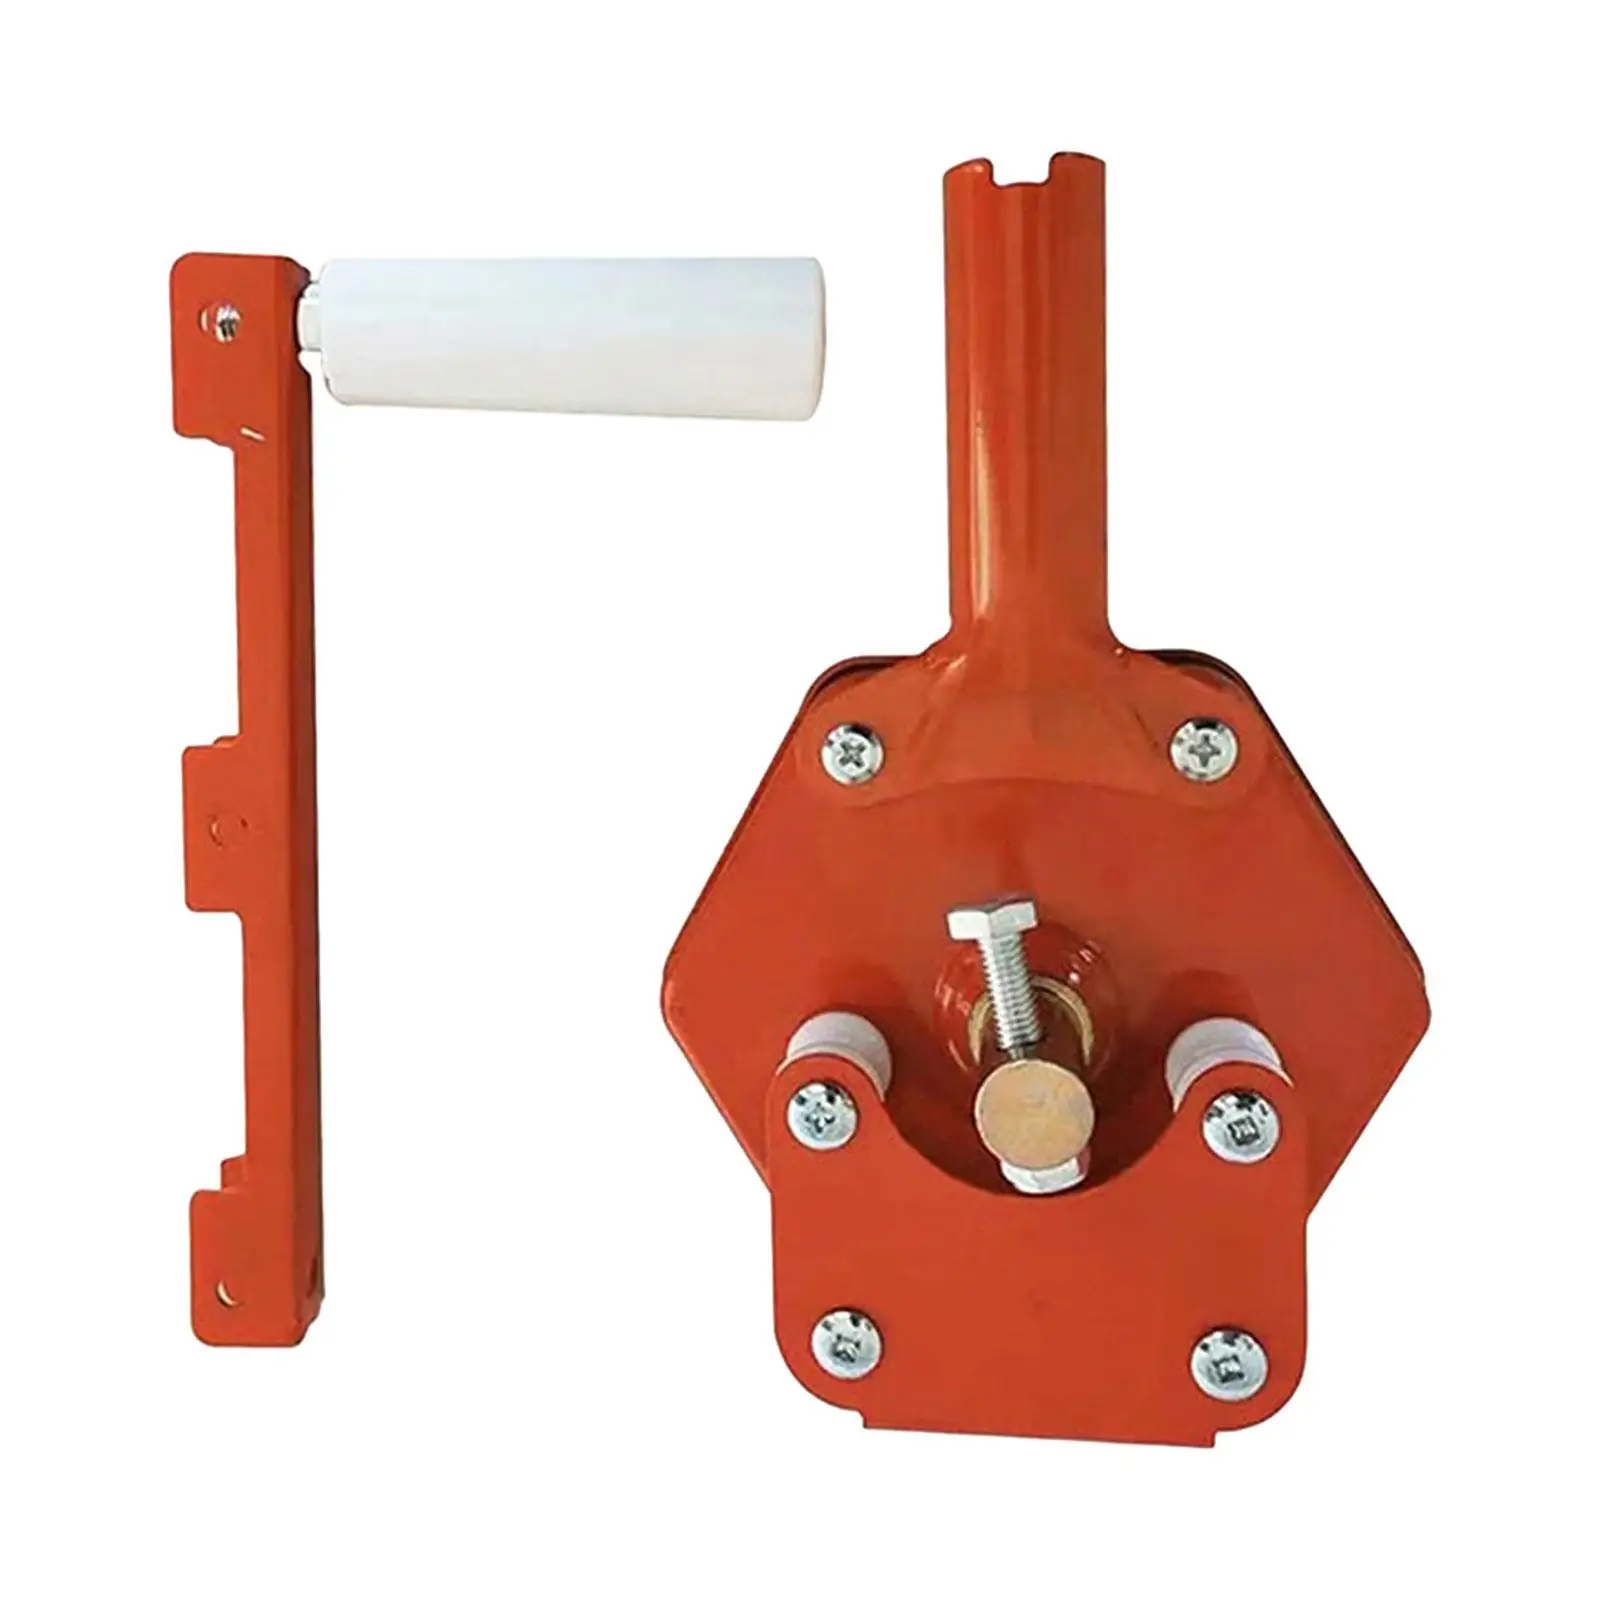 Greenhouse Hand Crank Winch Sturdy Manual Shaker for Planting Vegetables